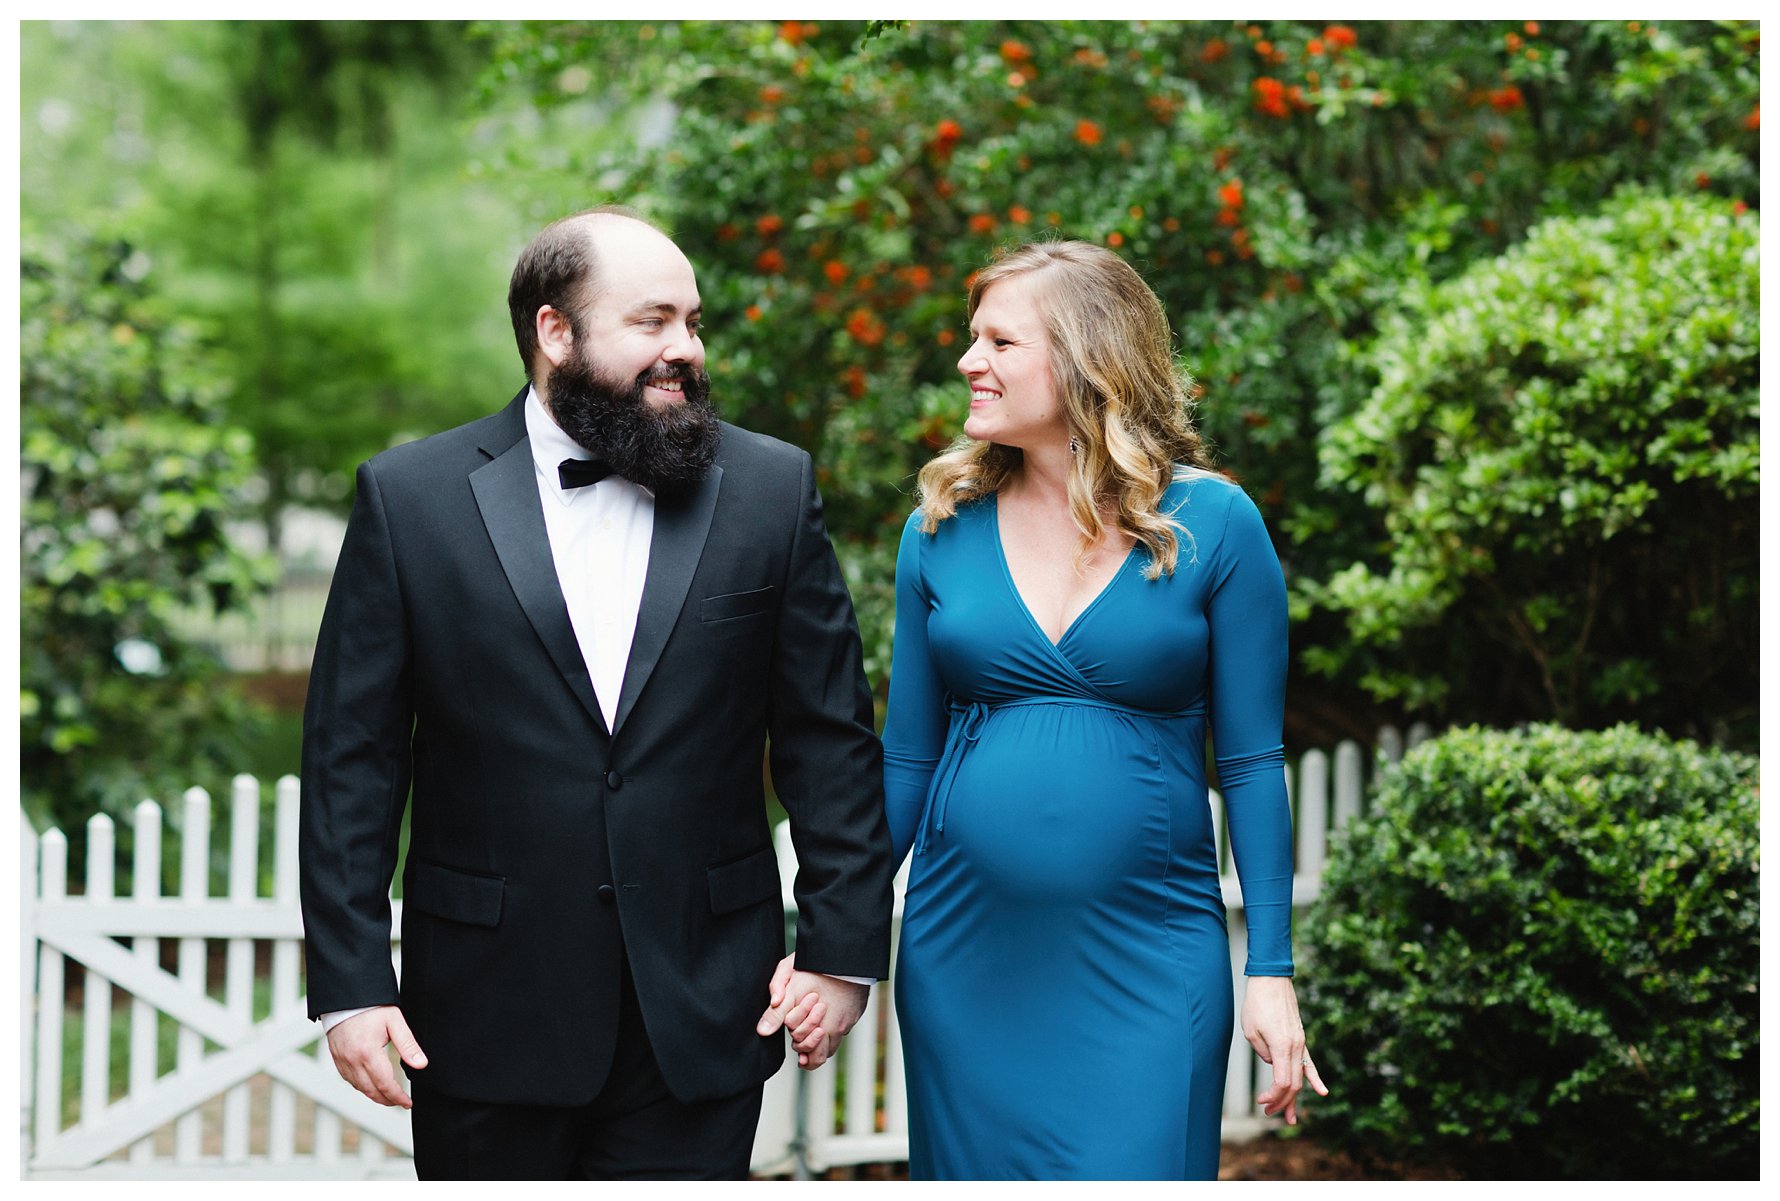 Raleigh_NC_Formal_Maternity_Photography_Blue_Black_Tie_0008